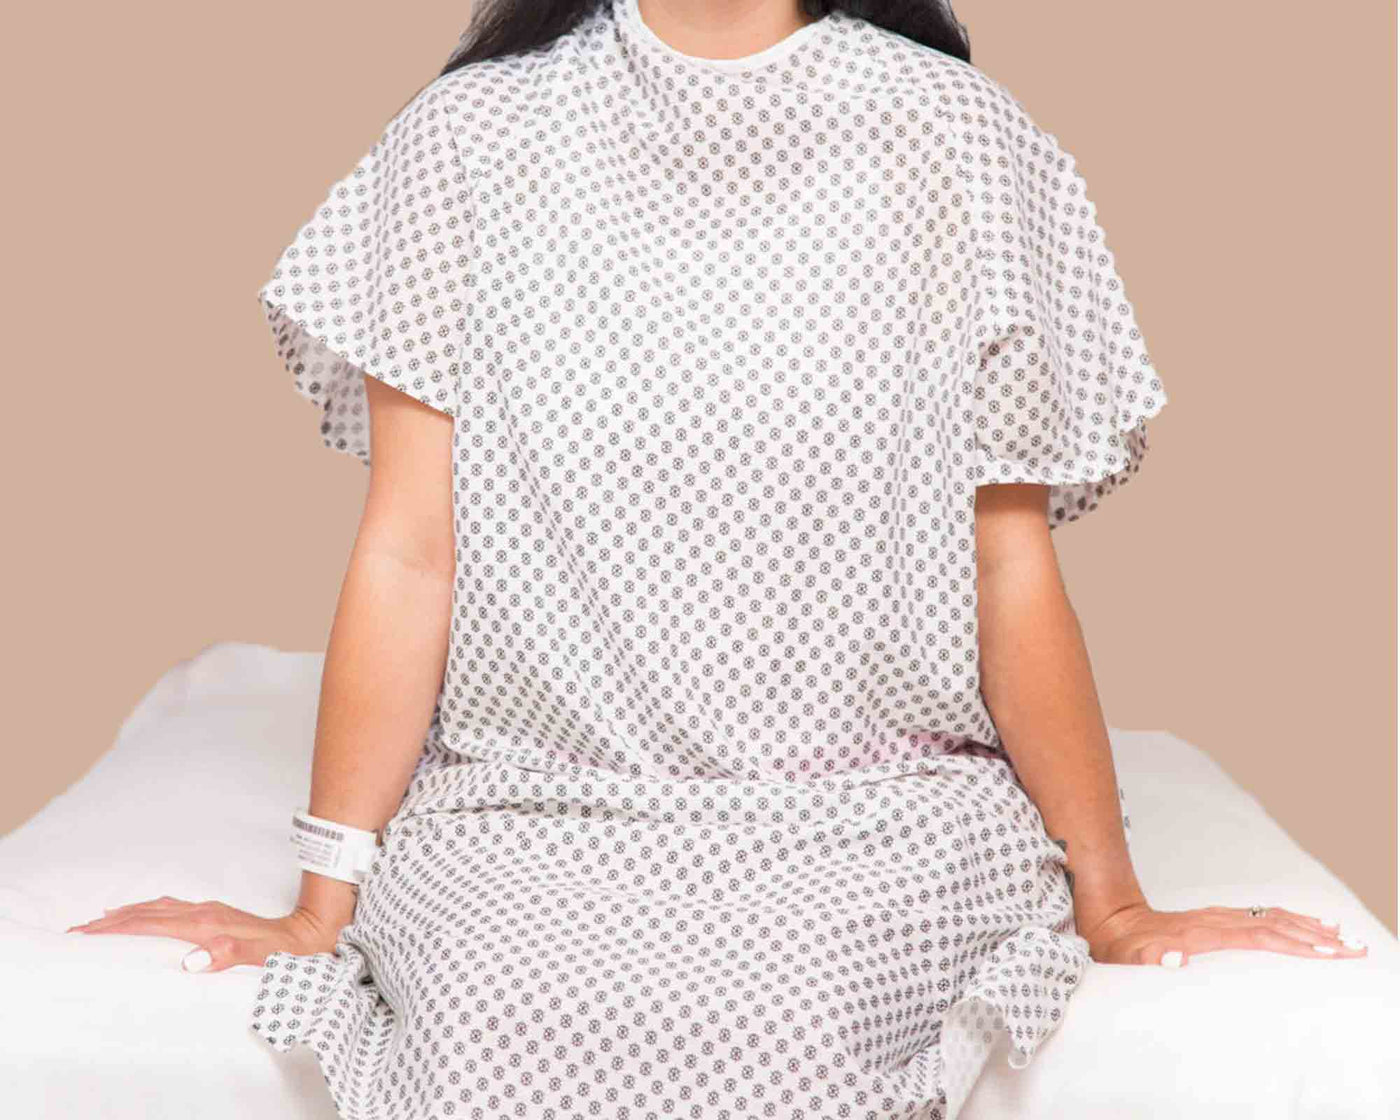 A woman wearing a snowflake hospital patient gown